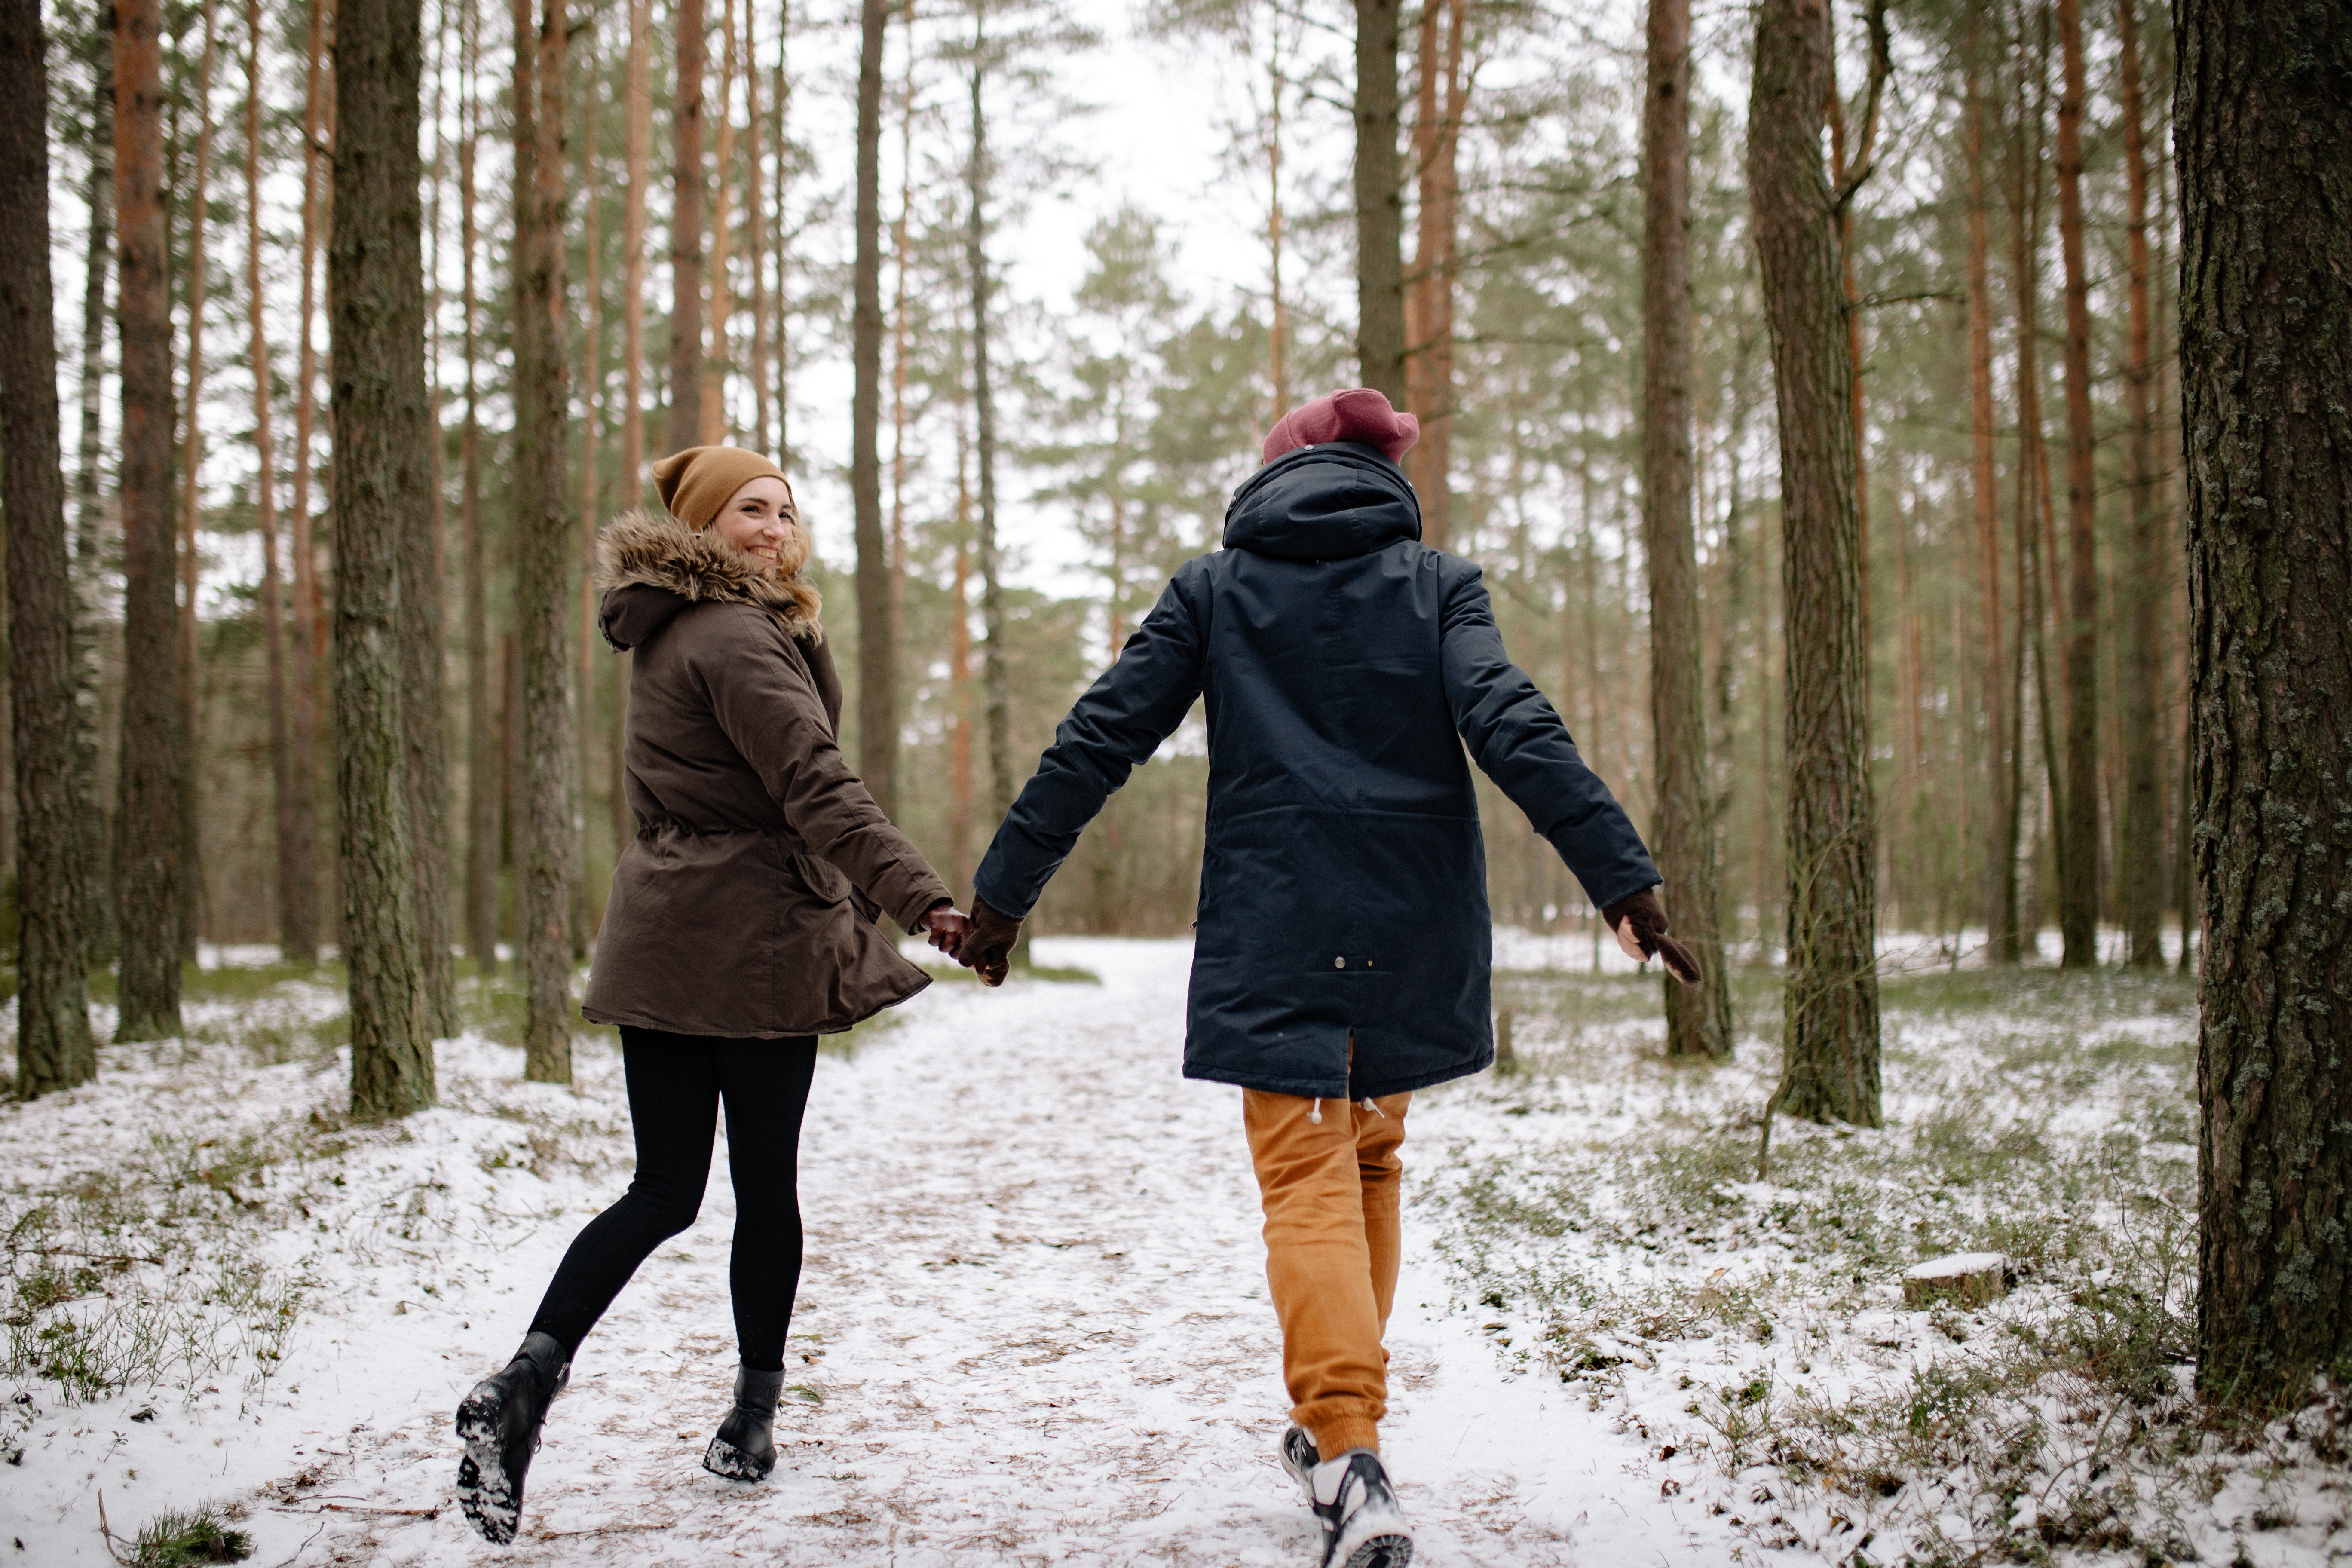 Couple in Snowy Forest